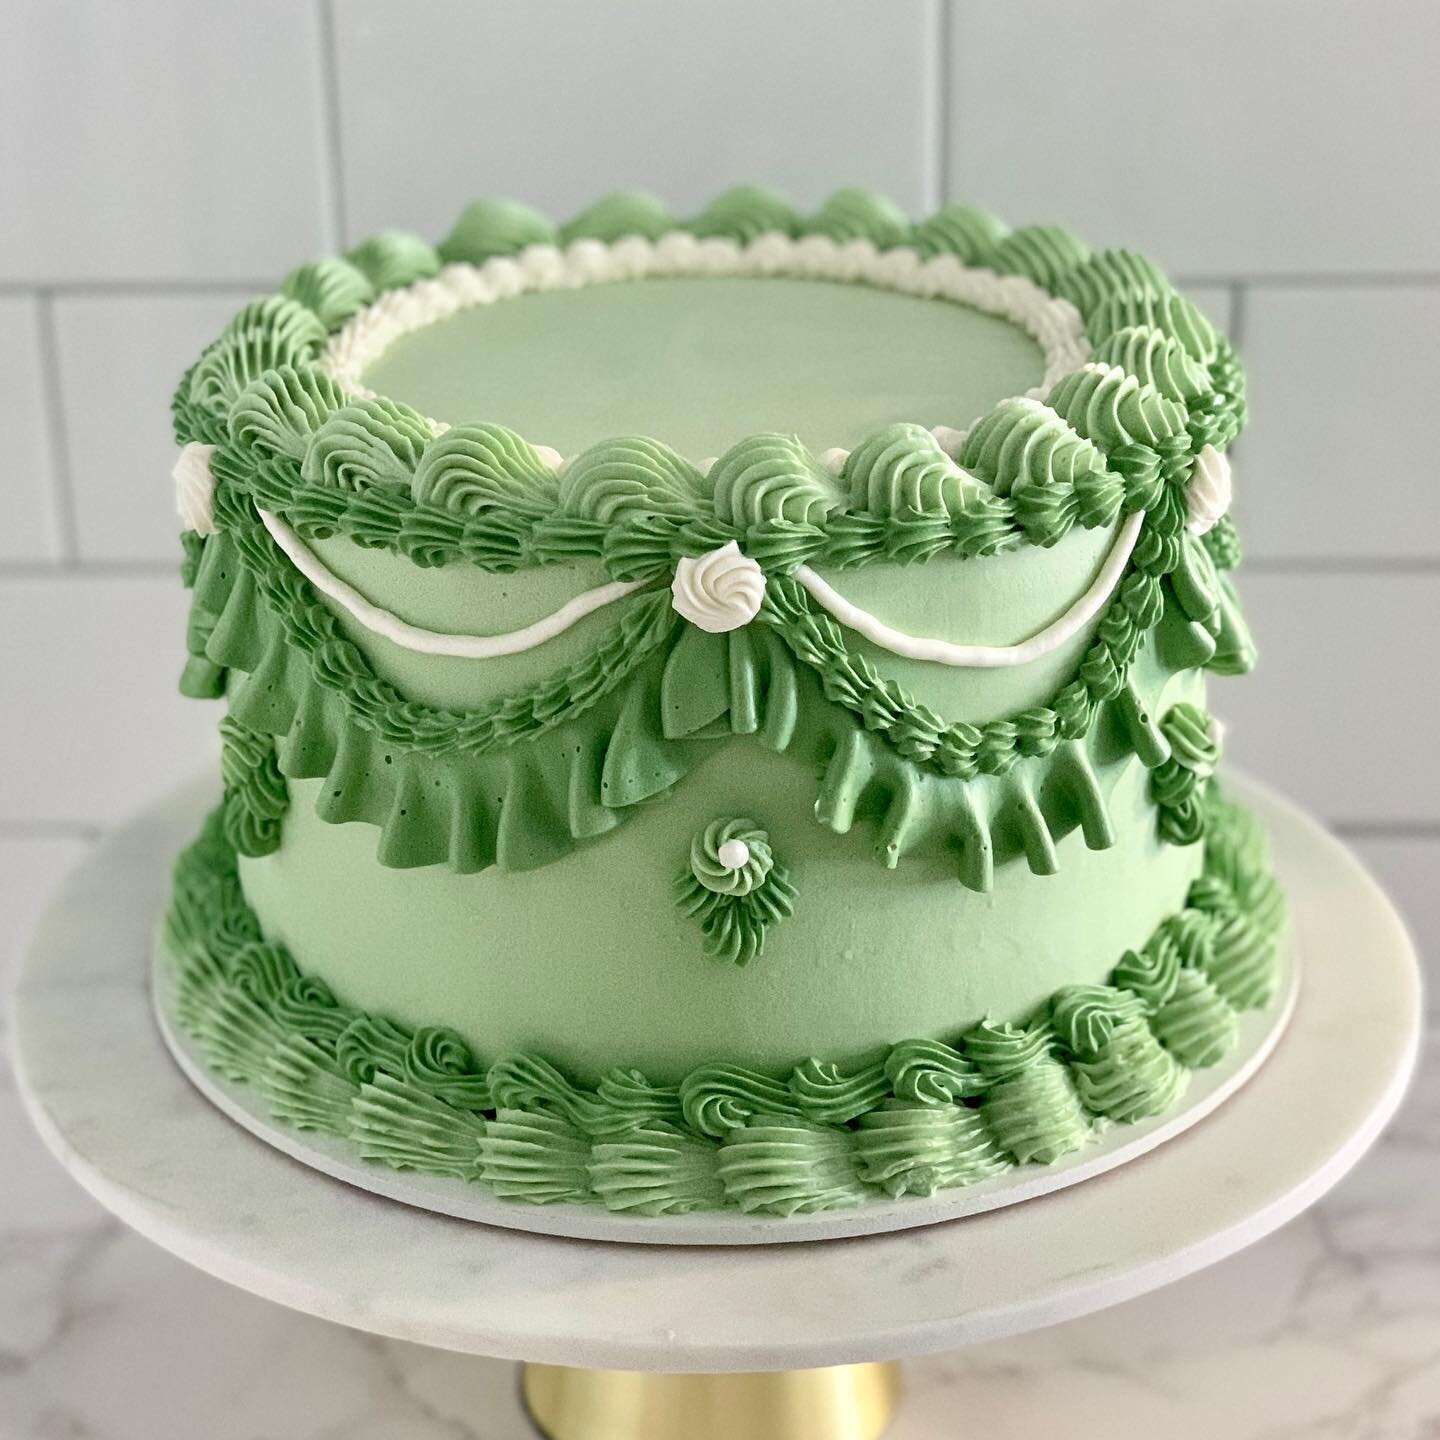 Green vintage cake for a Shrek-themed birthday! Inside is ube cake with vanilla buttercream. 

I love making vintage cakes - keep &lsquo;em coming!